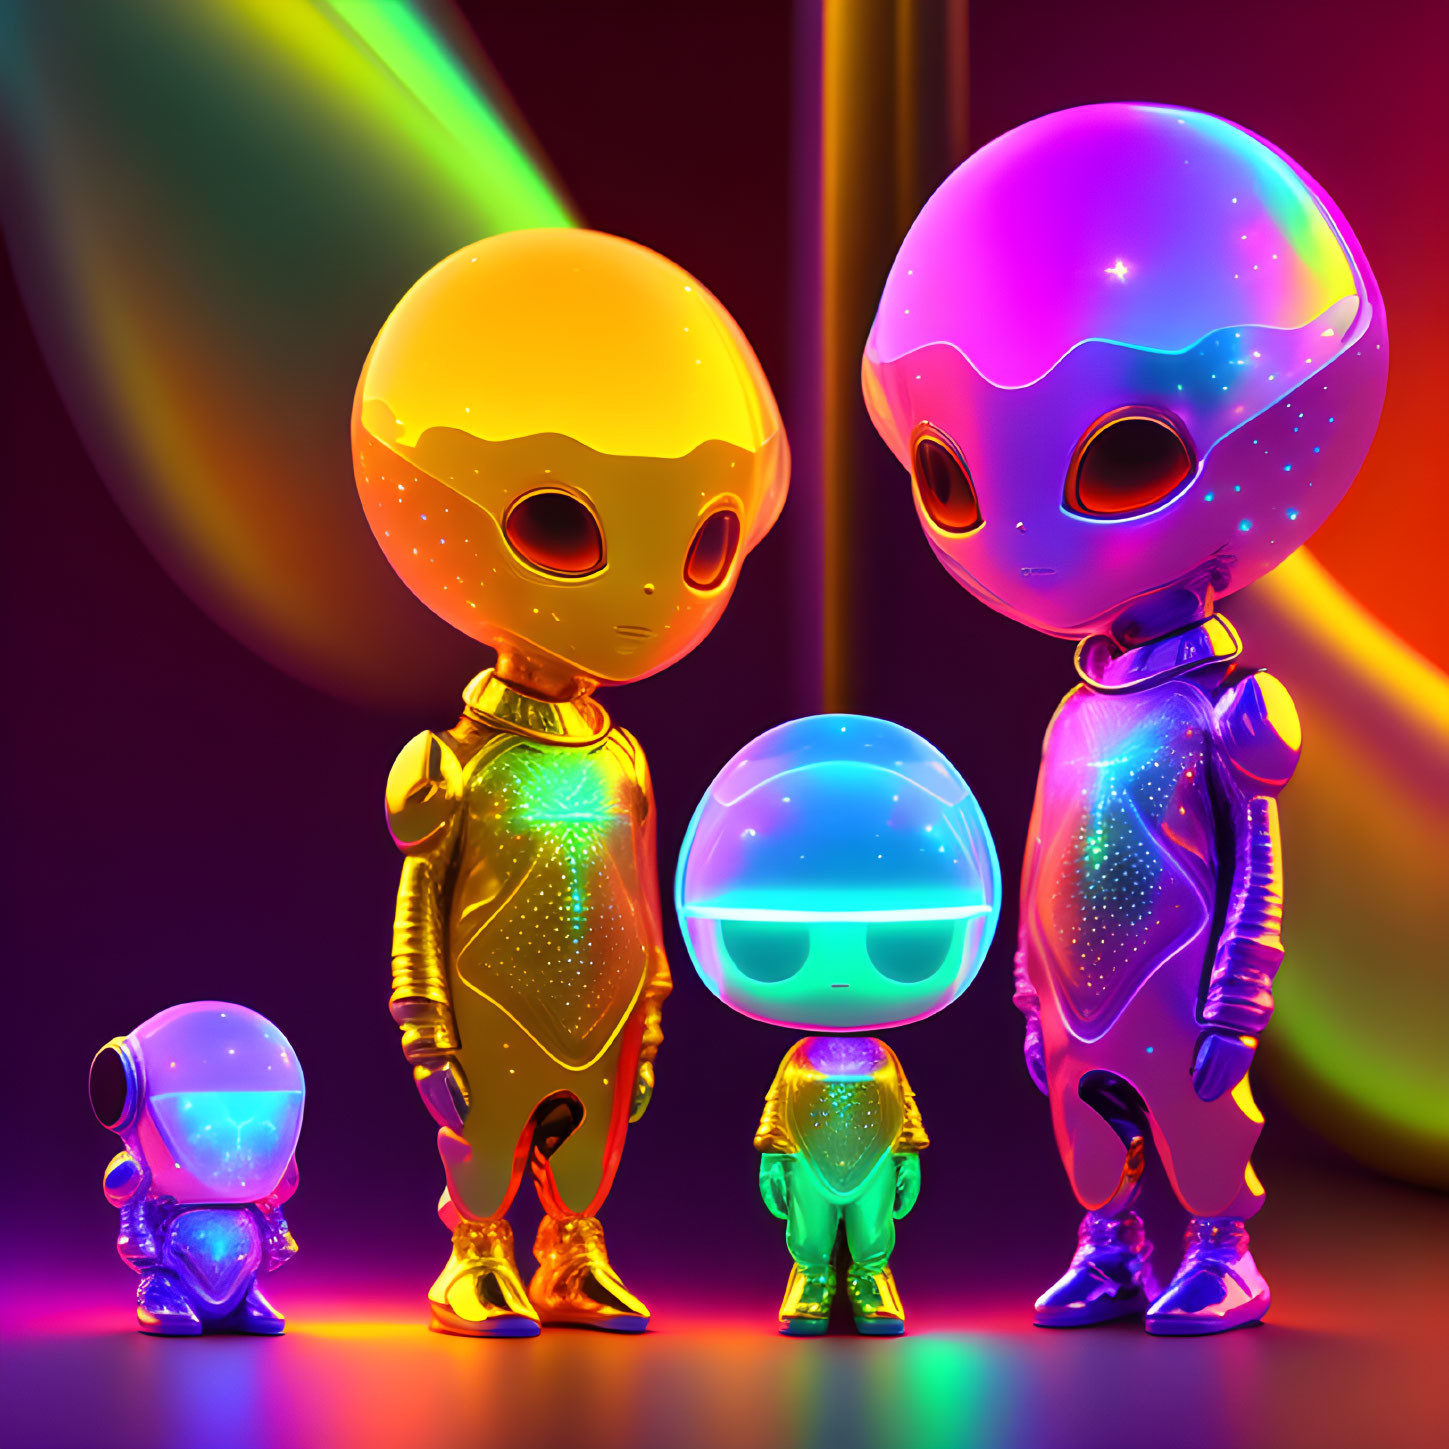 Vibrant 3D illustration: Alien family in gold, purple, and blue hues